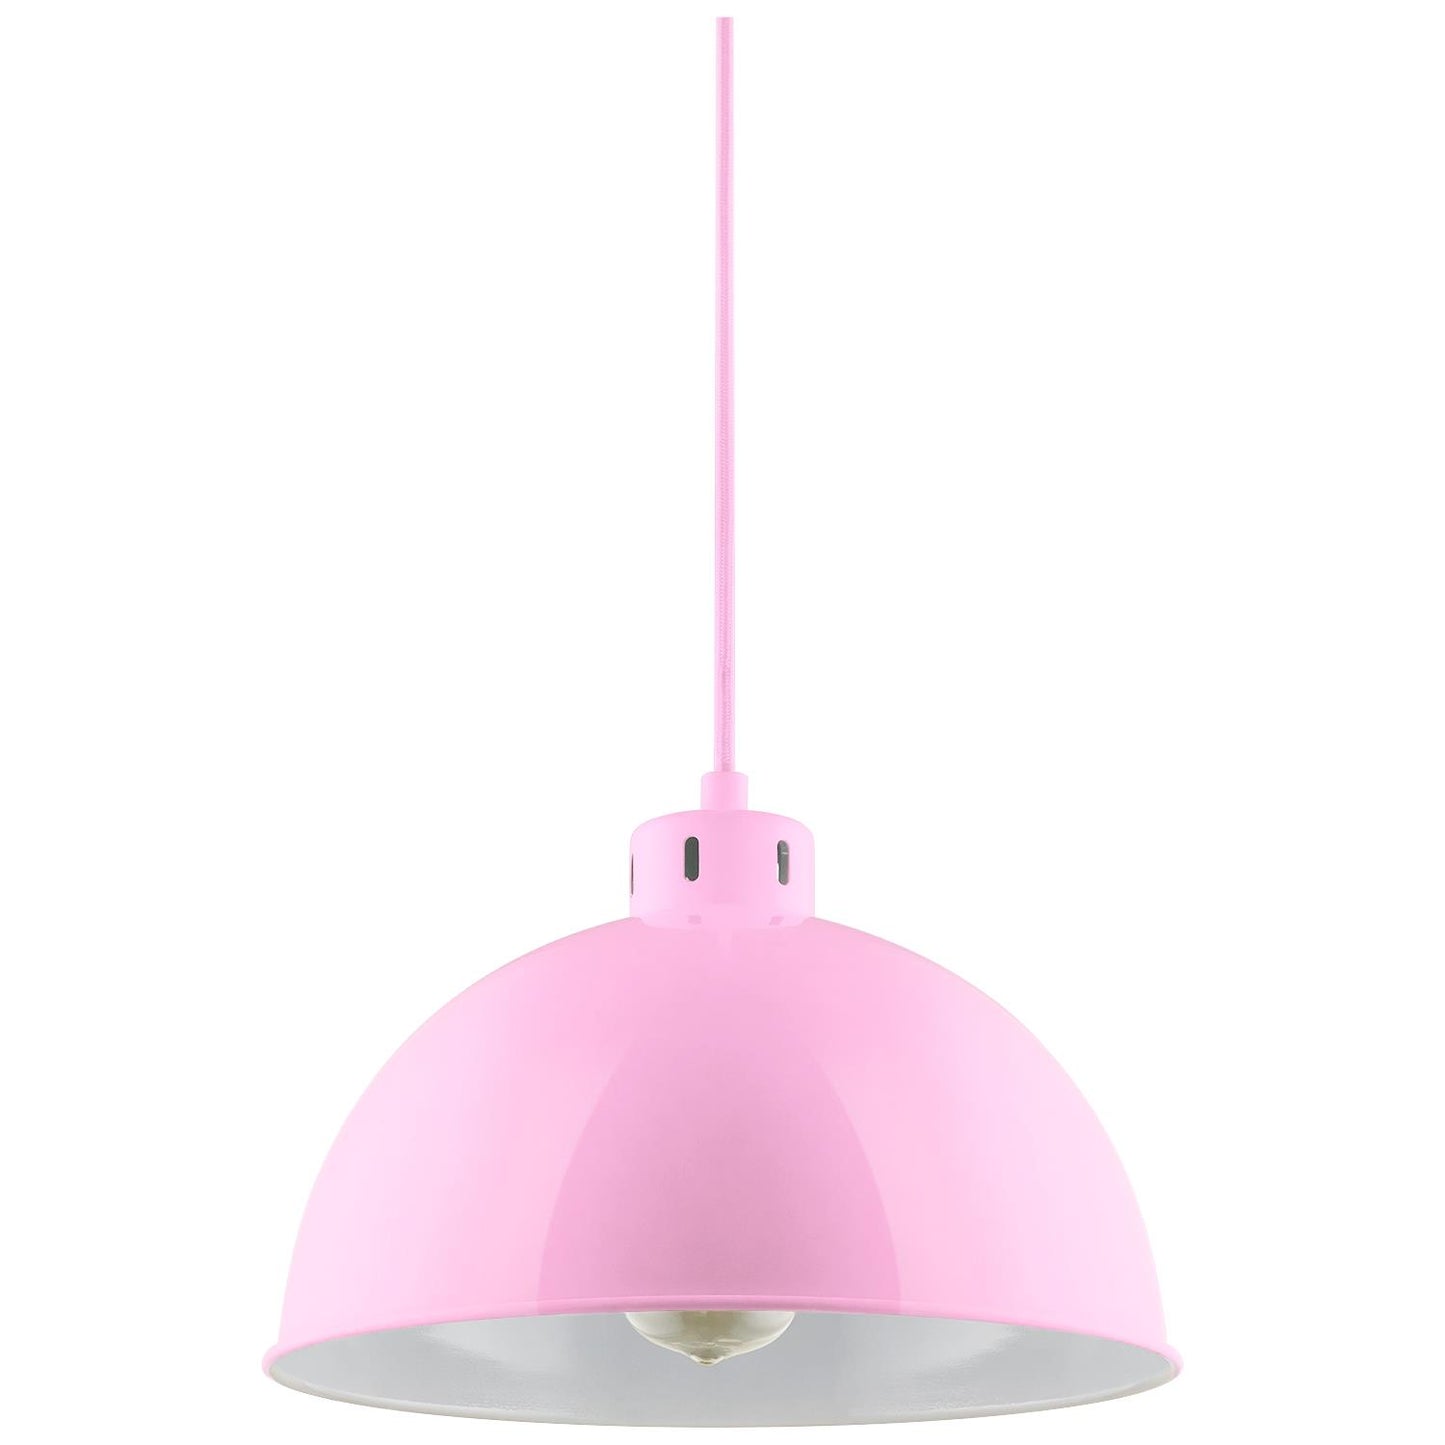 Sunlite CF/PD/S/P Pink Sona Residential Ceiling Pendant Light Fixtures With Medium (E26) Base